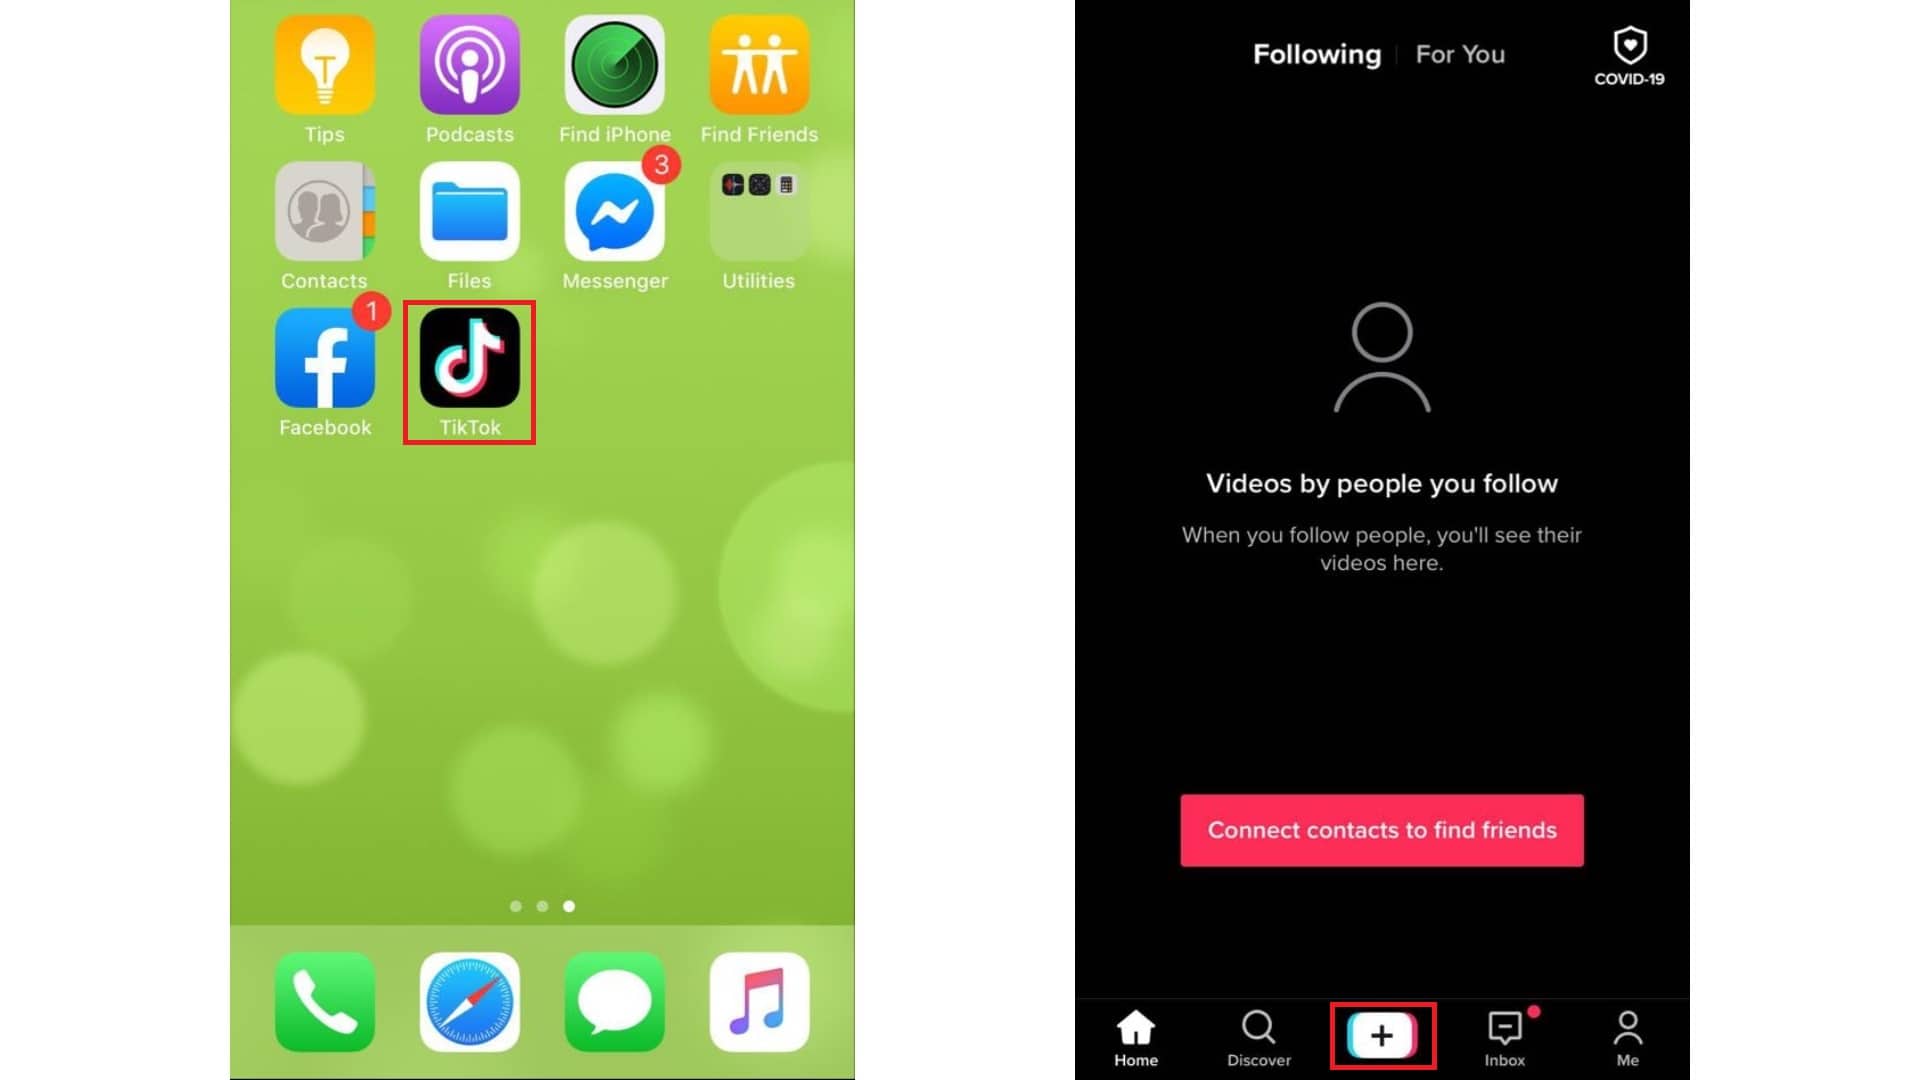 How-to-Create-a-Private-TikTok-Video-on-iPhone-2020